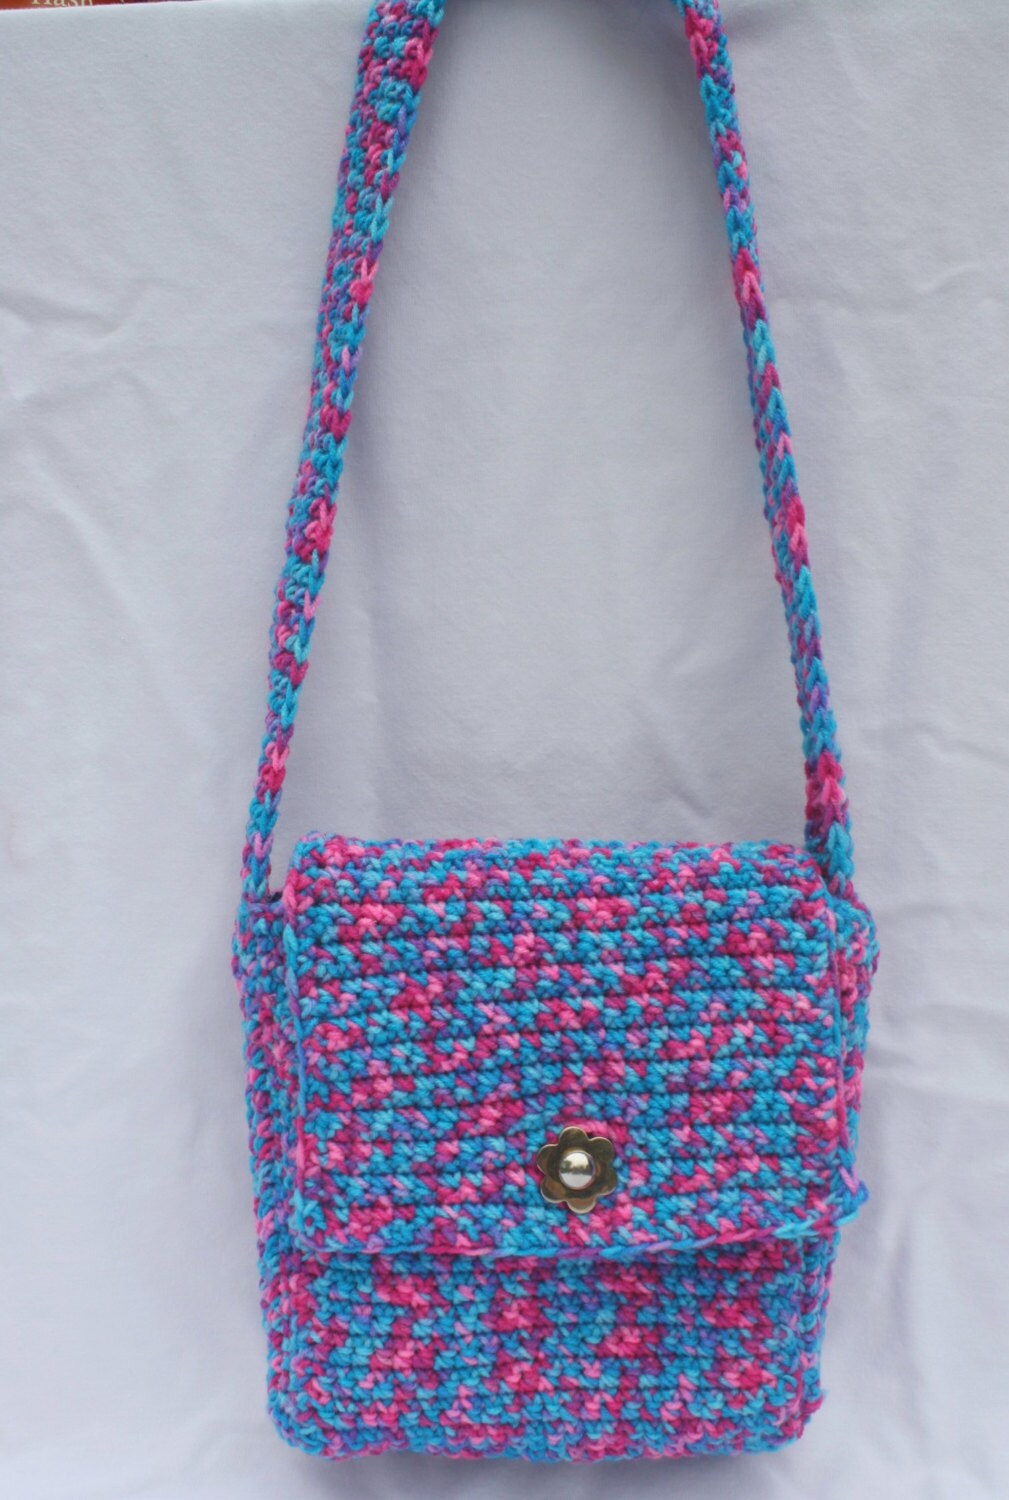 Hot Pink and Electric Blue Messenger Bag Neon Crochet Purse | Etsy